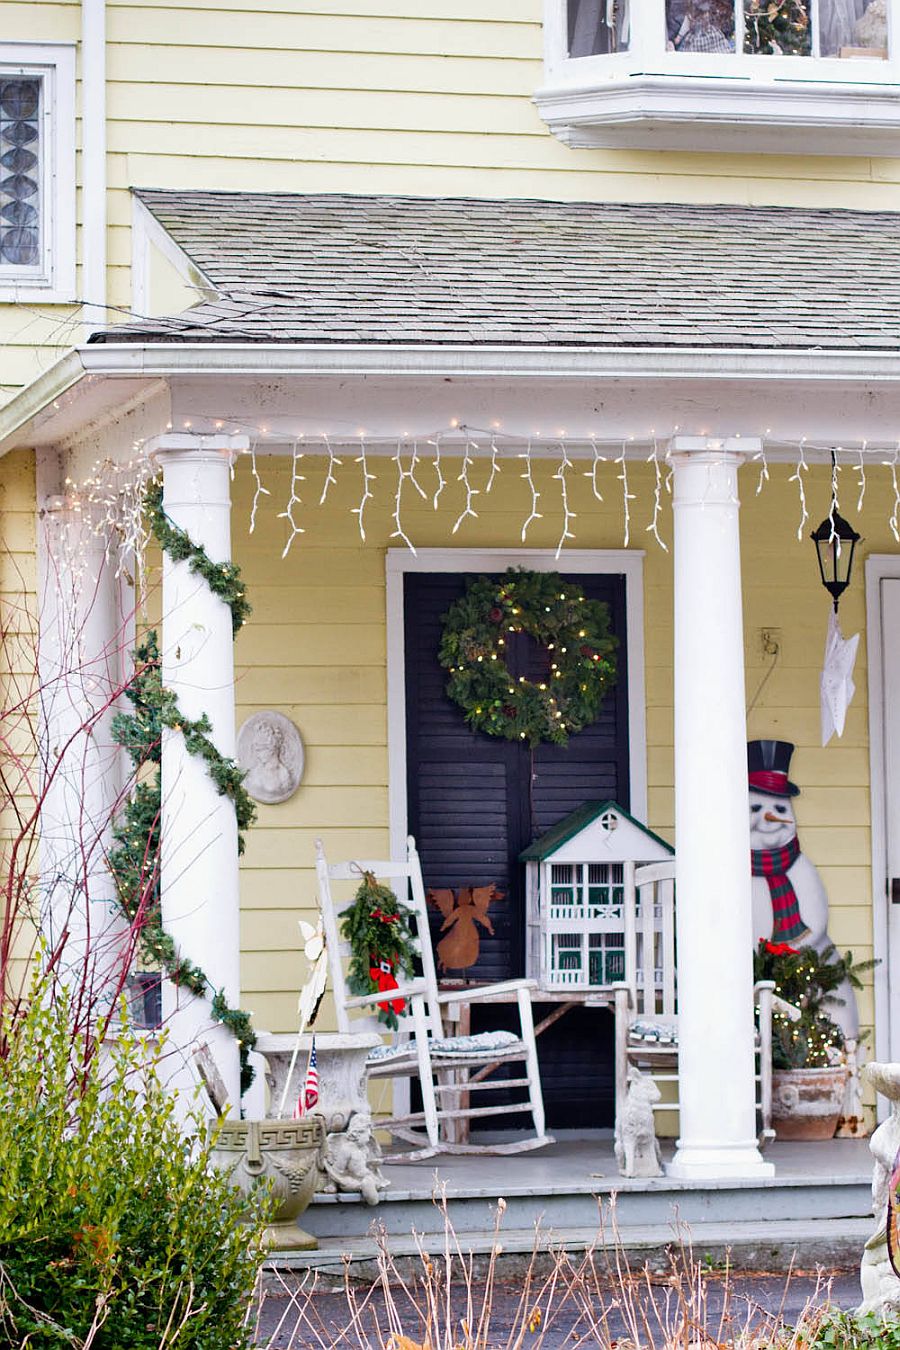 Snowman, string lighting and a holiday wreath transform this small porch area into a festive space